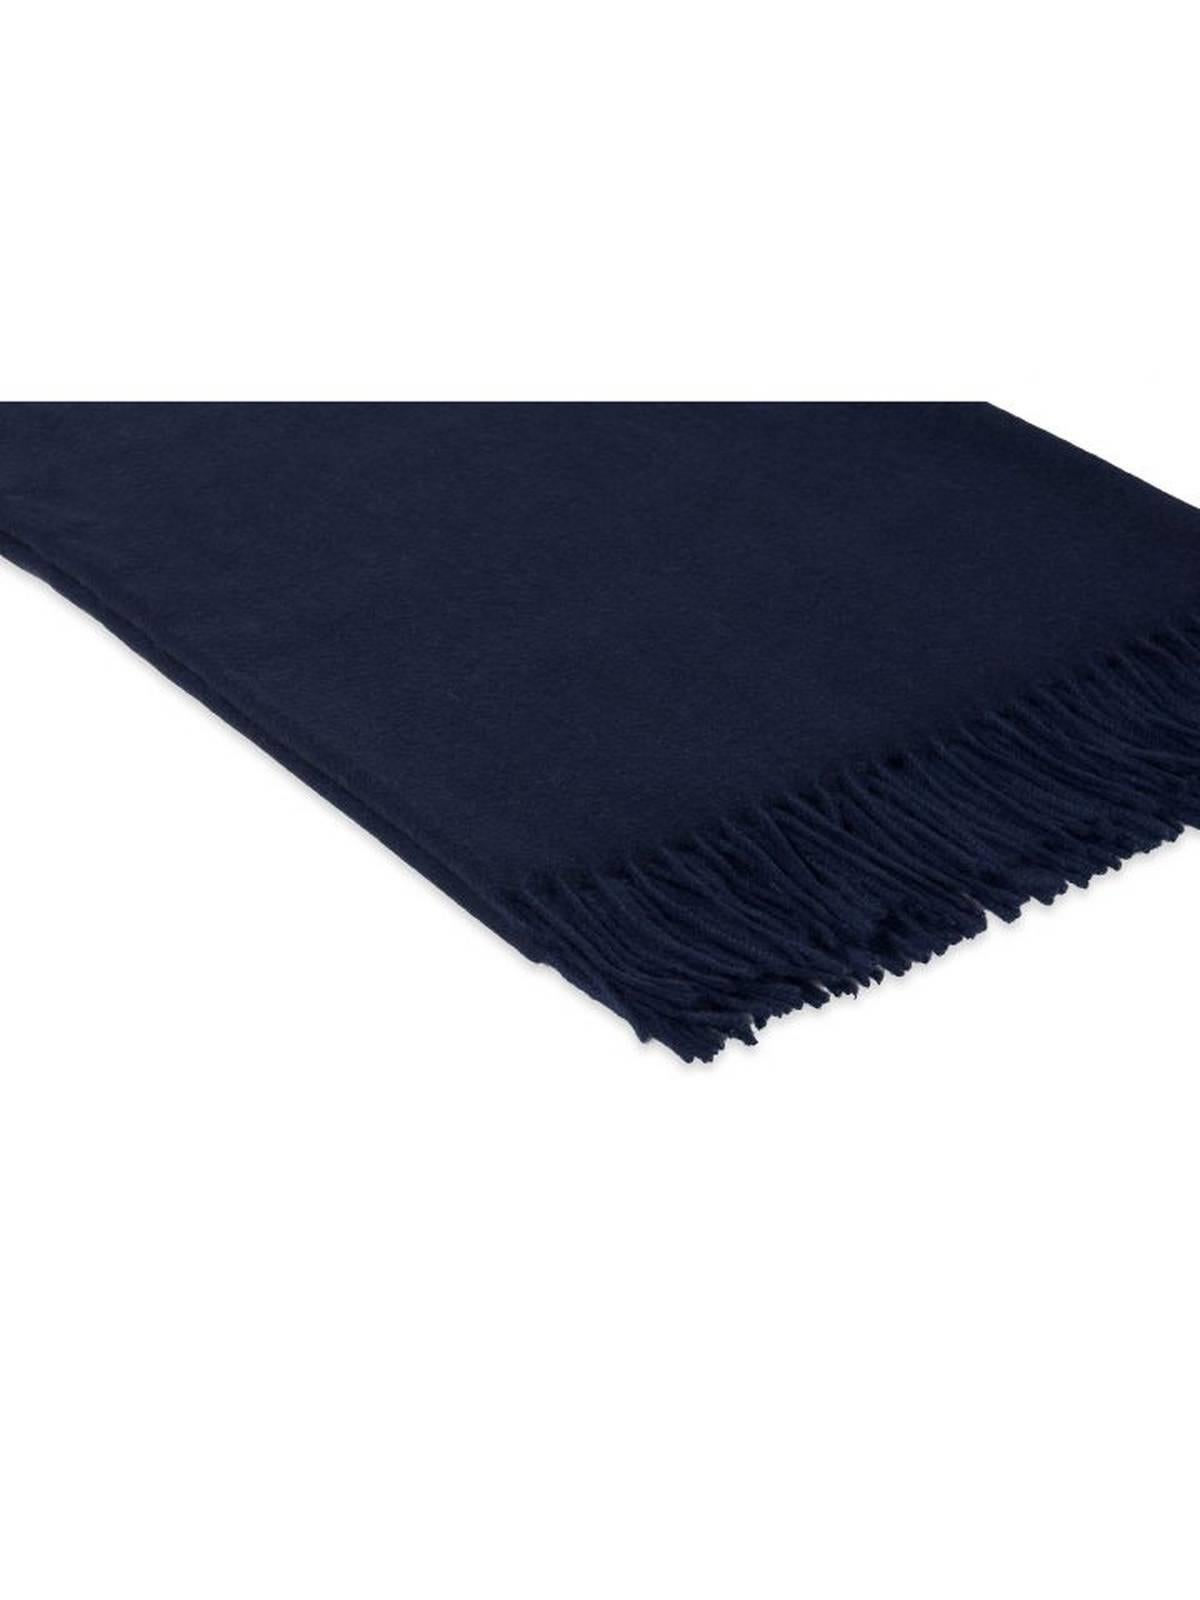 100% Italian cashmere finished with natural brushing made with thistles. Measure: 360 gram/sq meter.